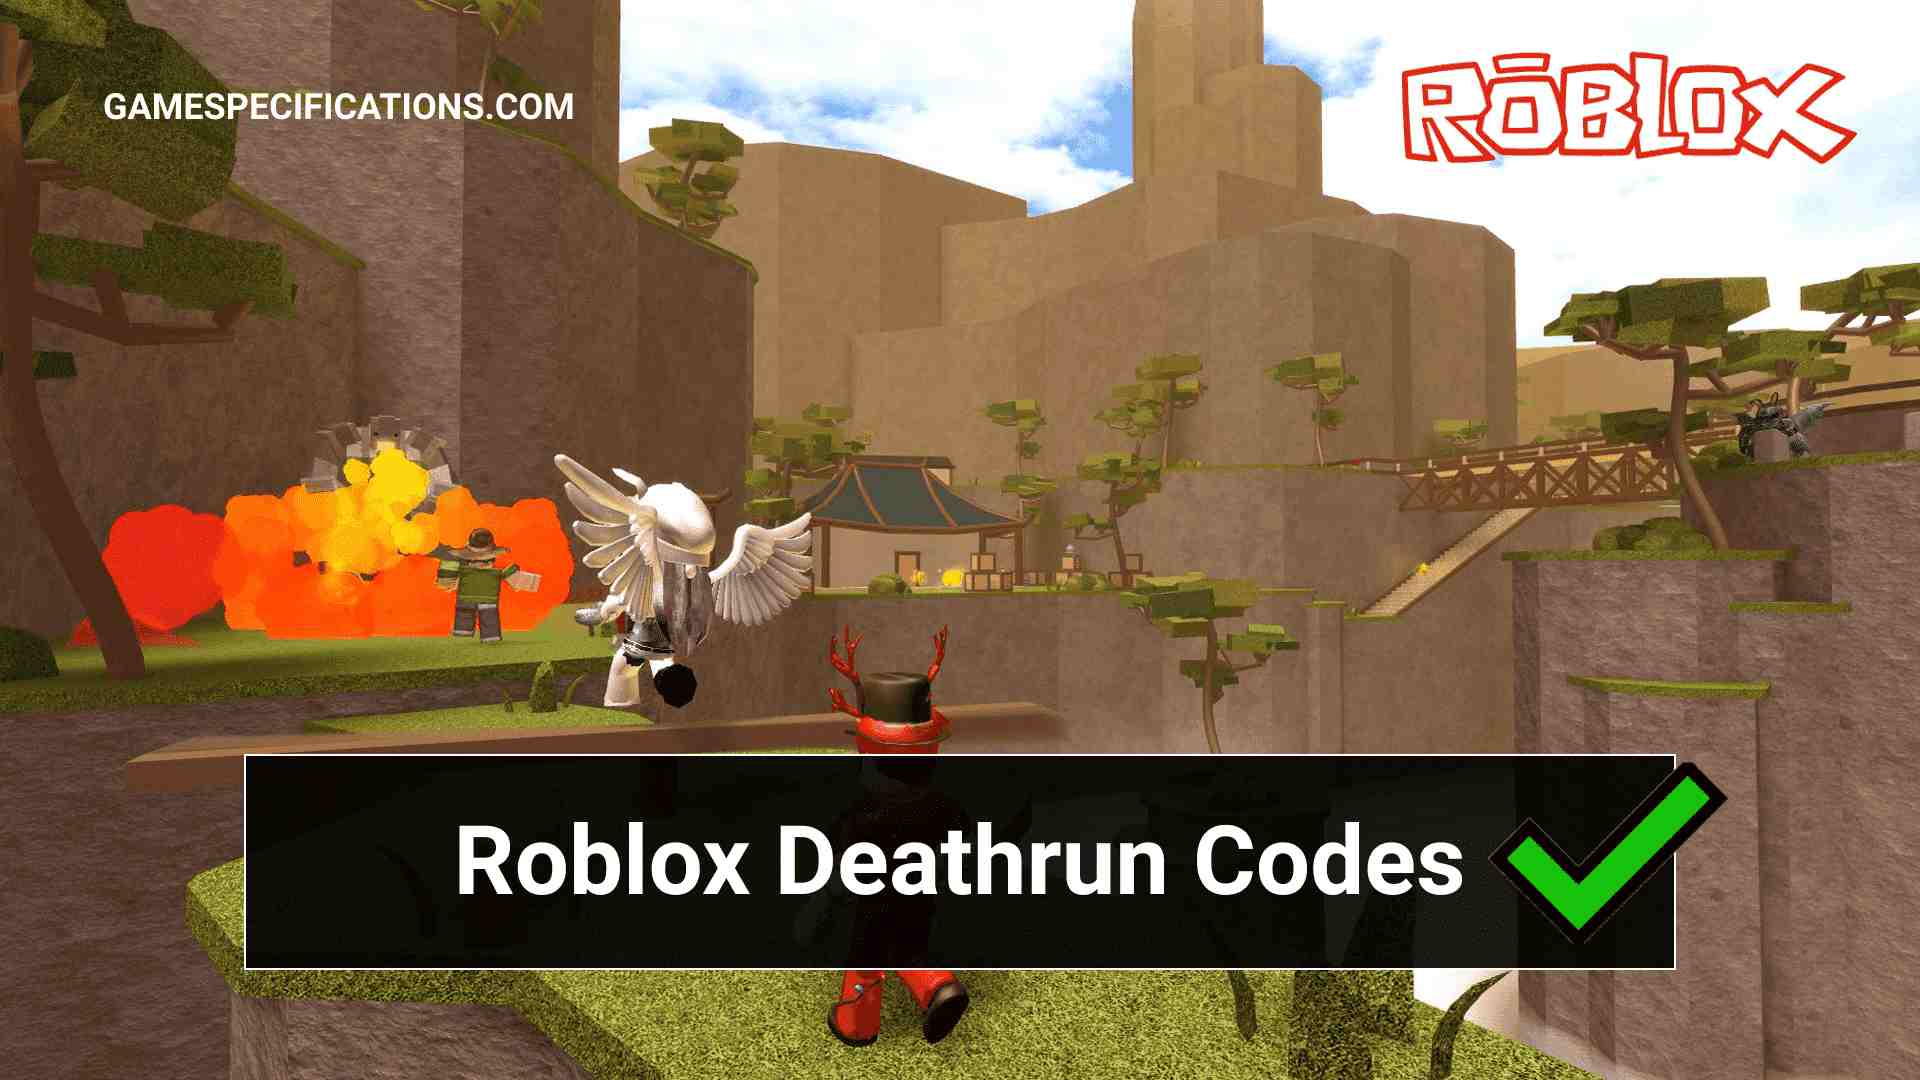 Roblox Deathrun Codes July 2021 Game Specifications - castle defense roblox codes